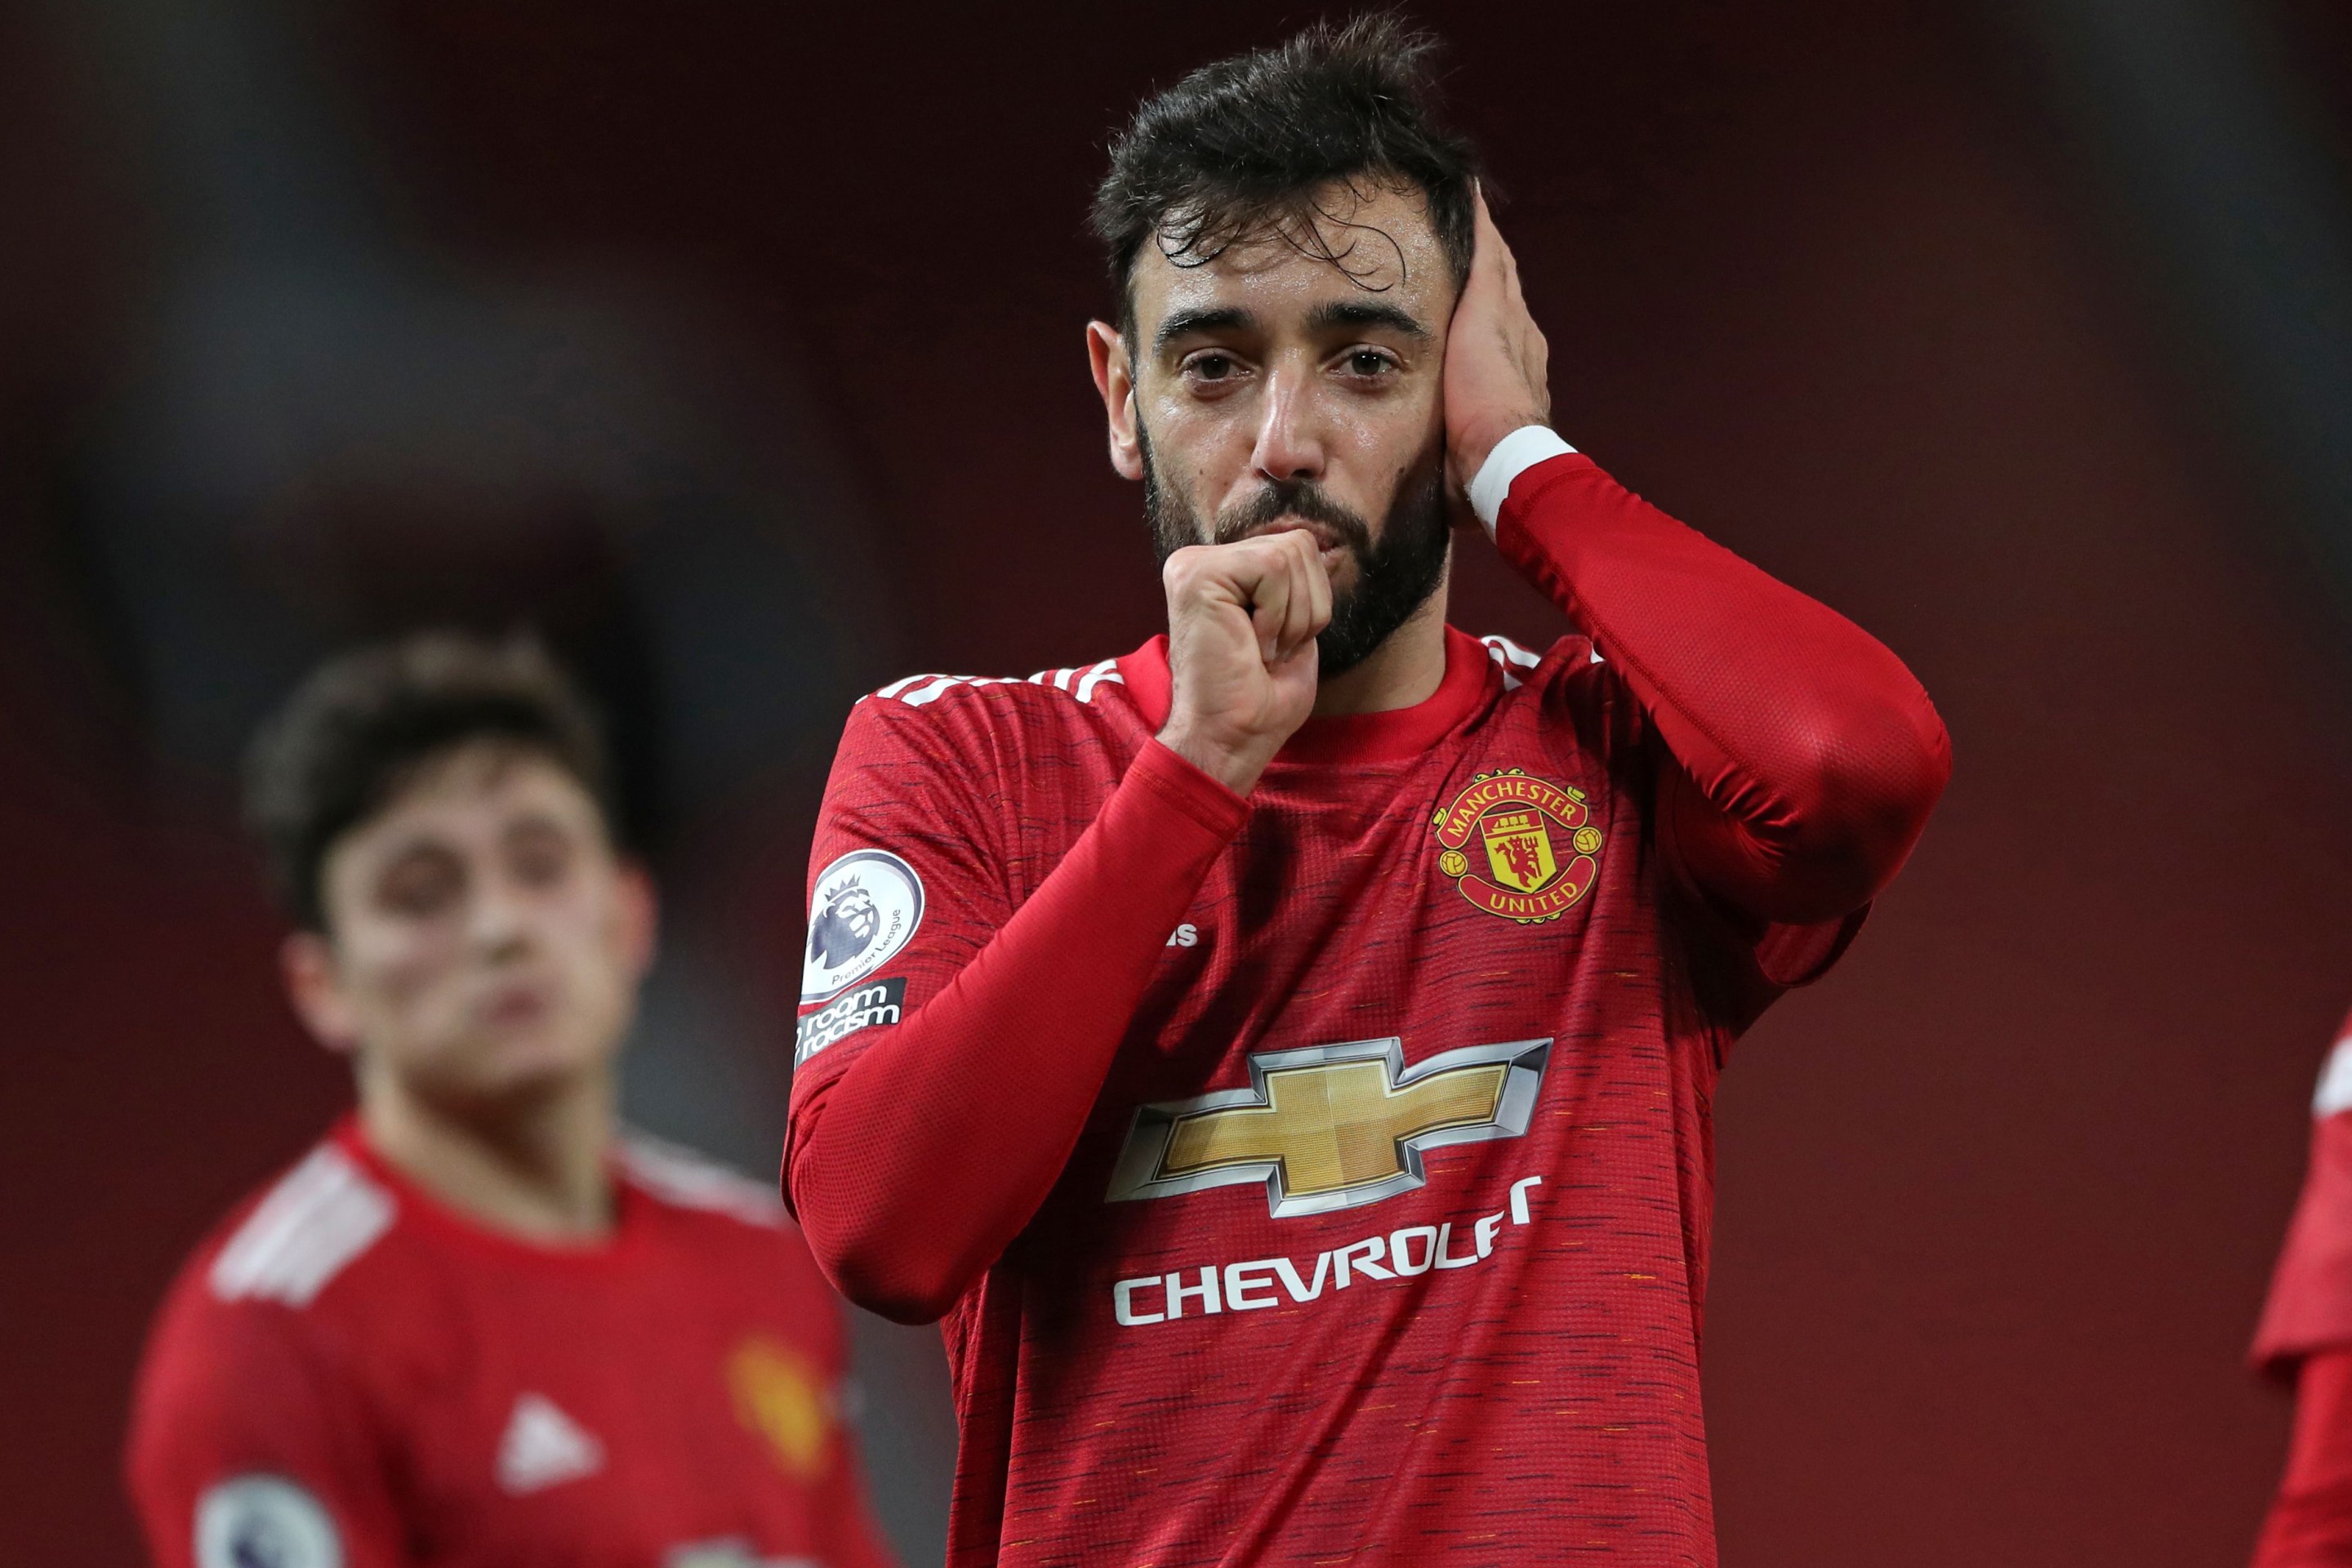 Manchester United's Portuguese midfielder Bruno Fernandes celebrates after scoring their third goal during the English Premier League football match between Manchester United and Leeds United at Old Trafford in Manchester, north west England, on December 20, 2020.